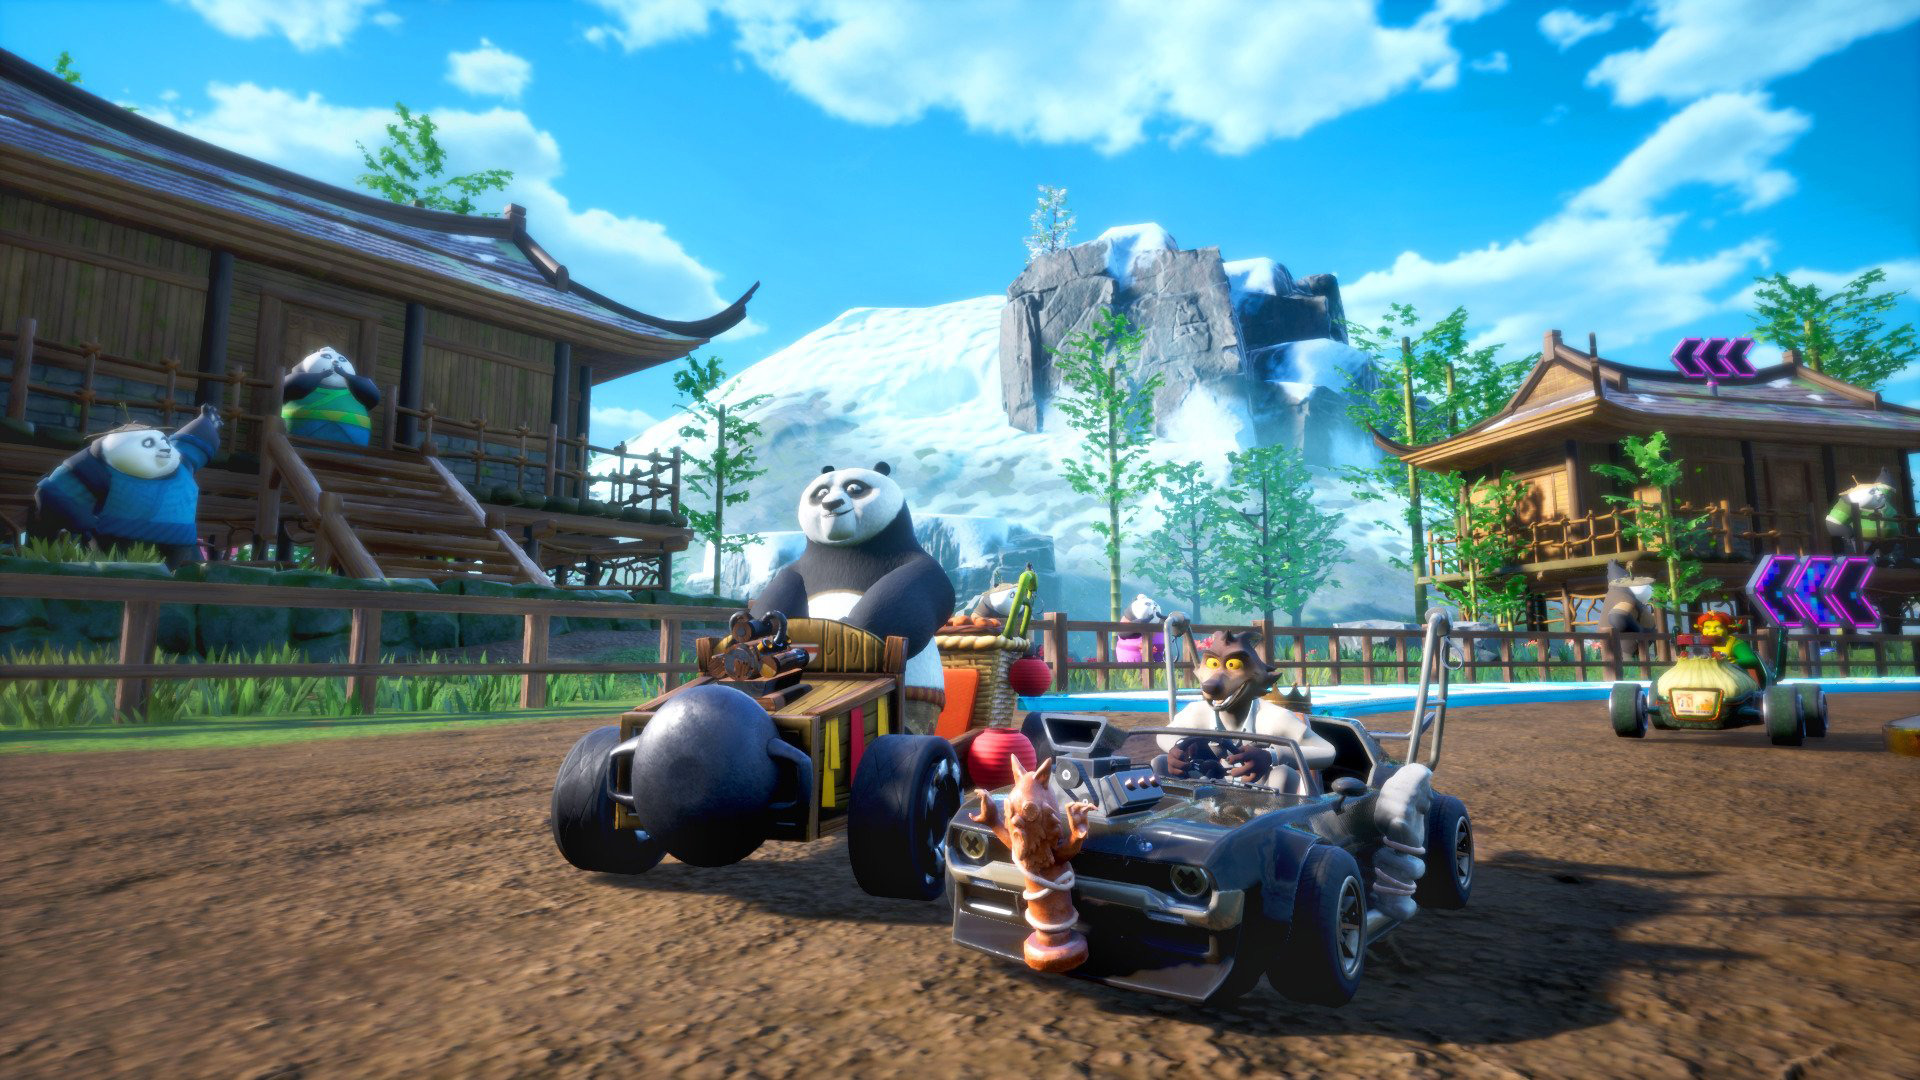 DreamWorks All-Star Kart Racing is set to release sometime this year